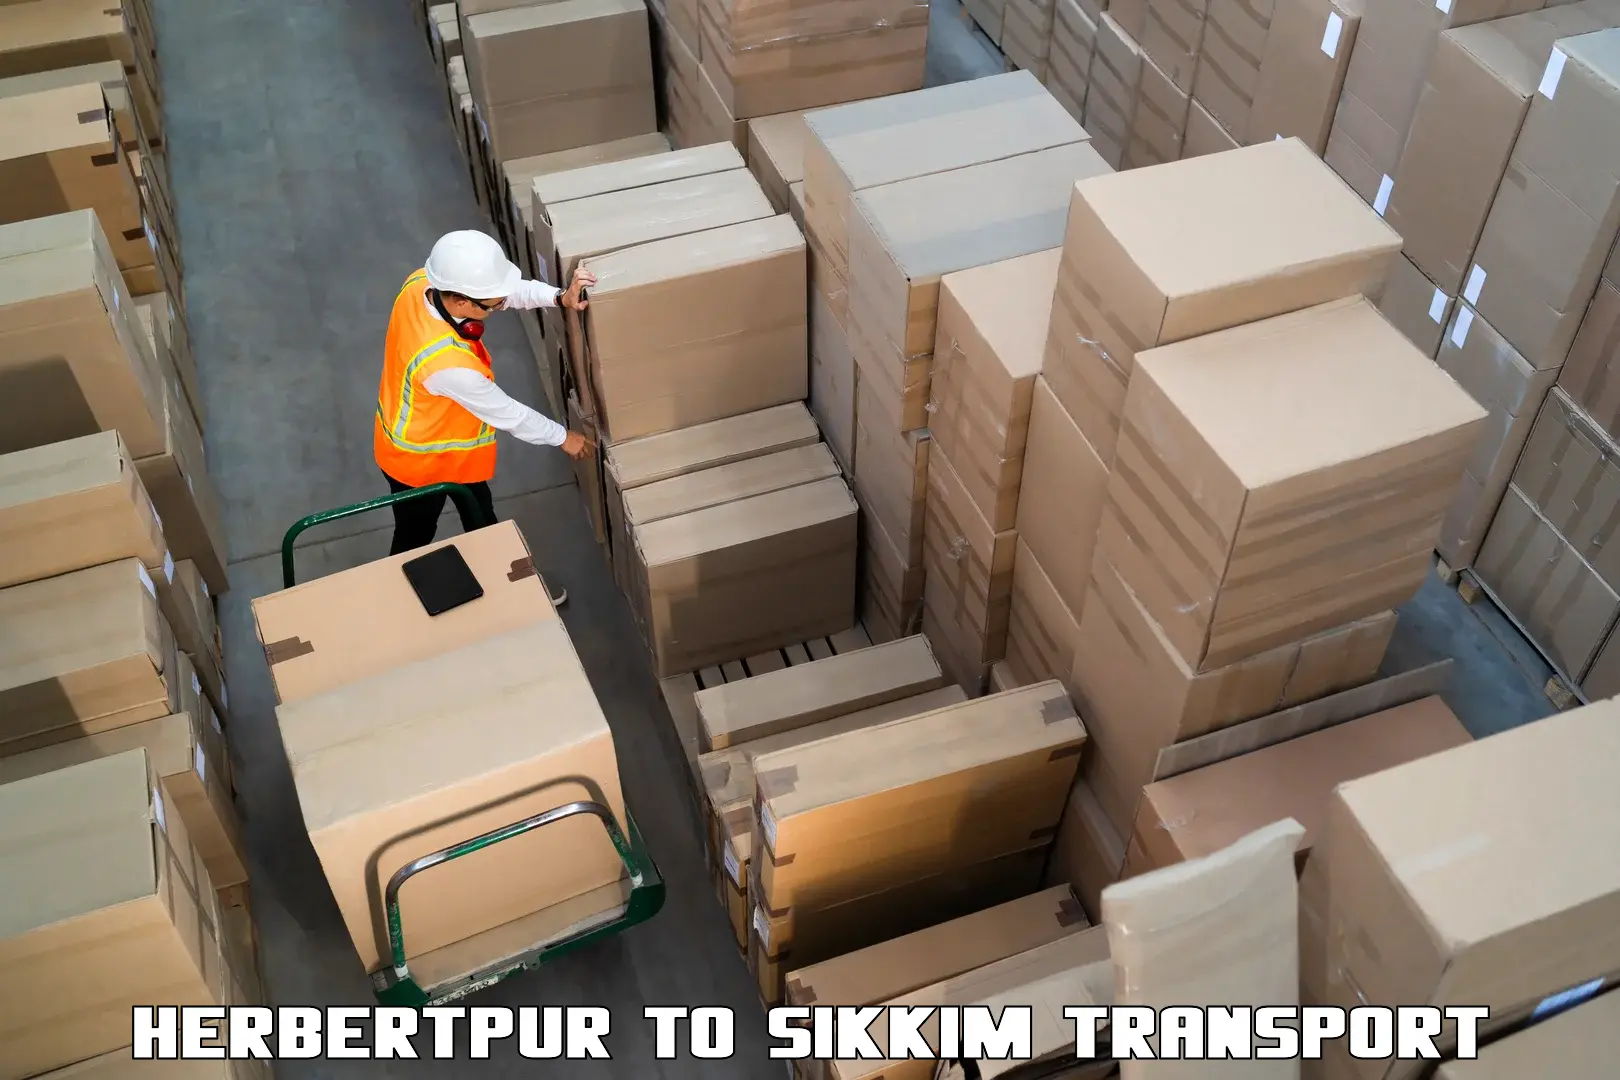 Daily transport service Herbertpur to Sikkim